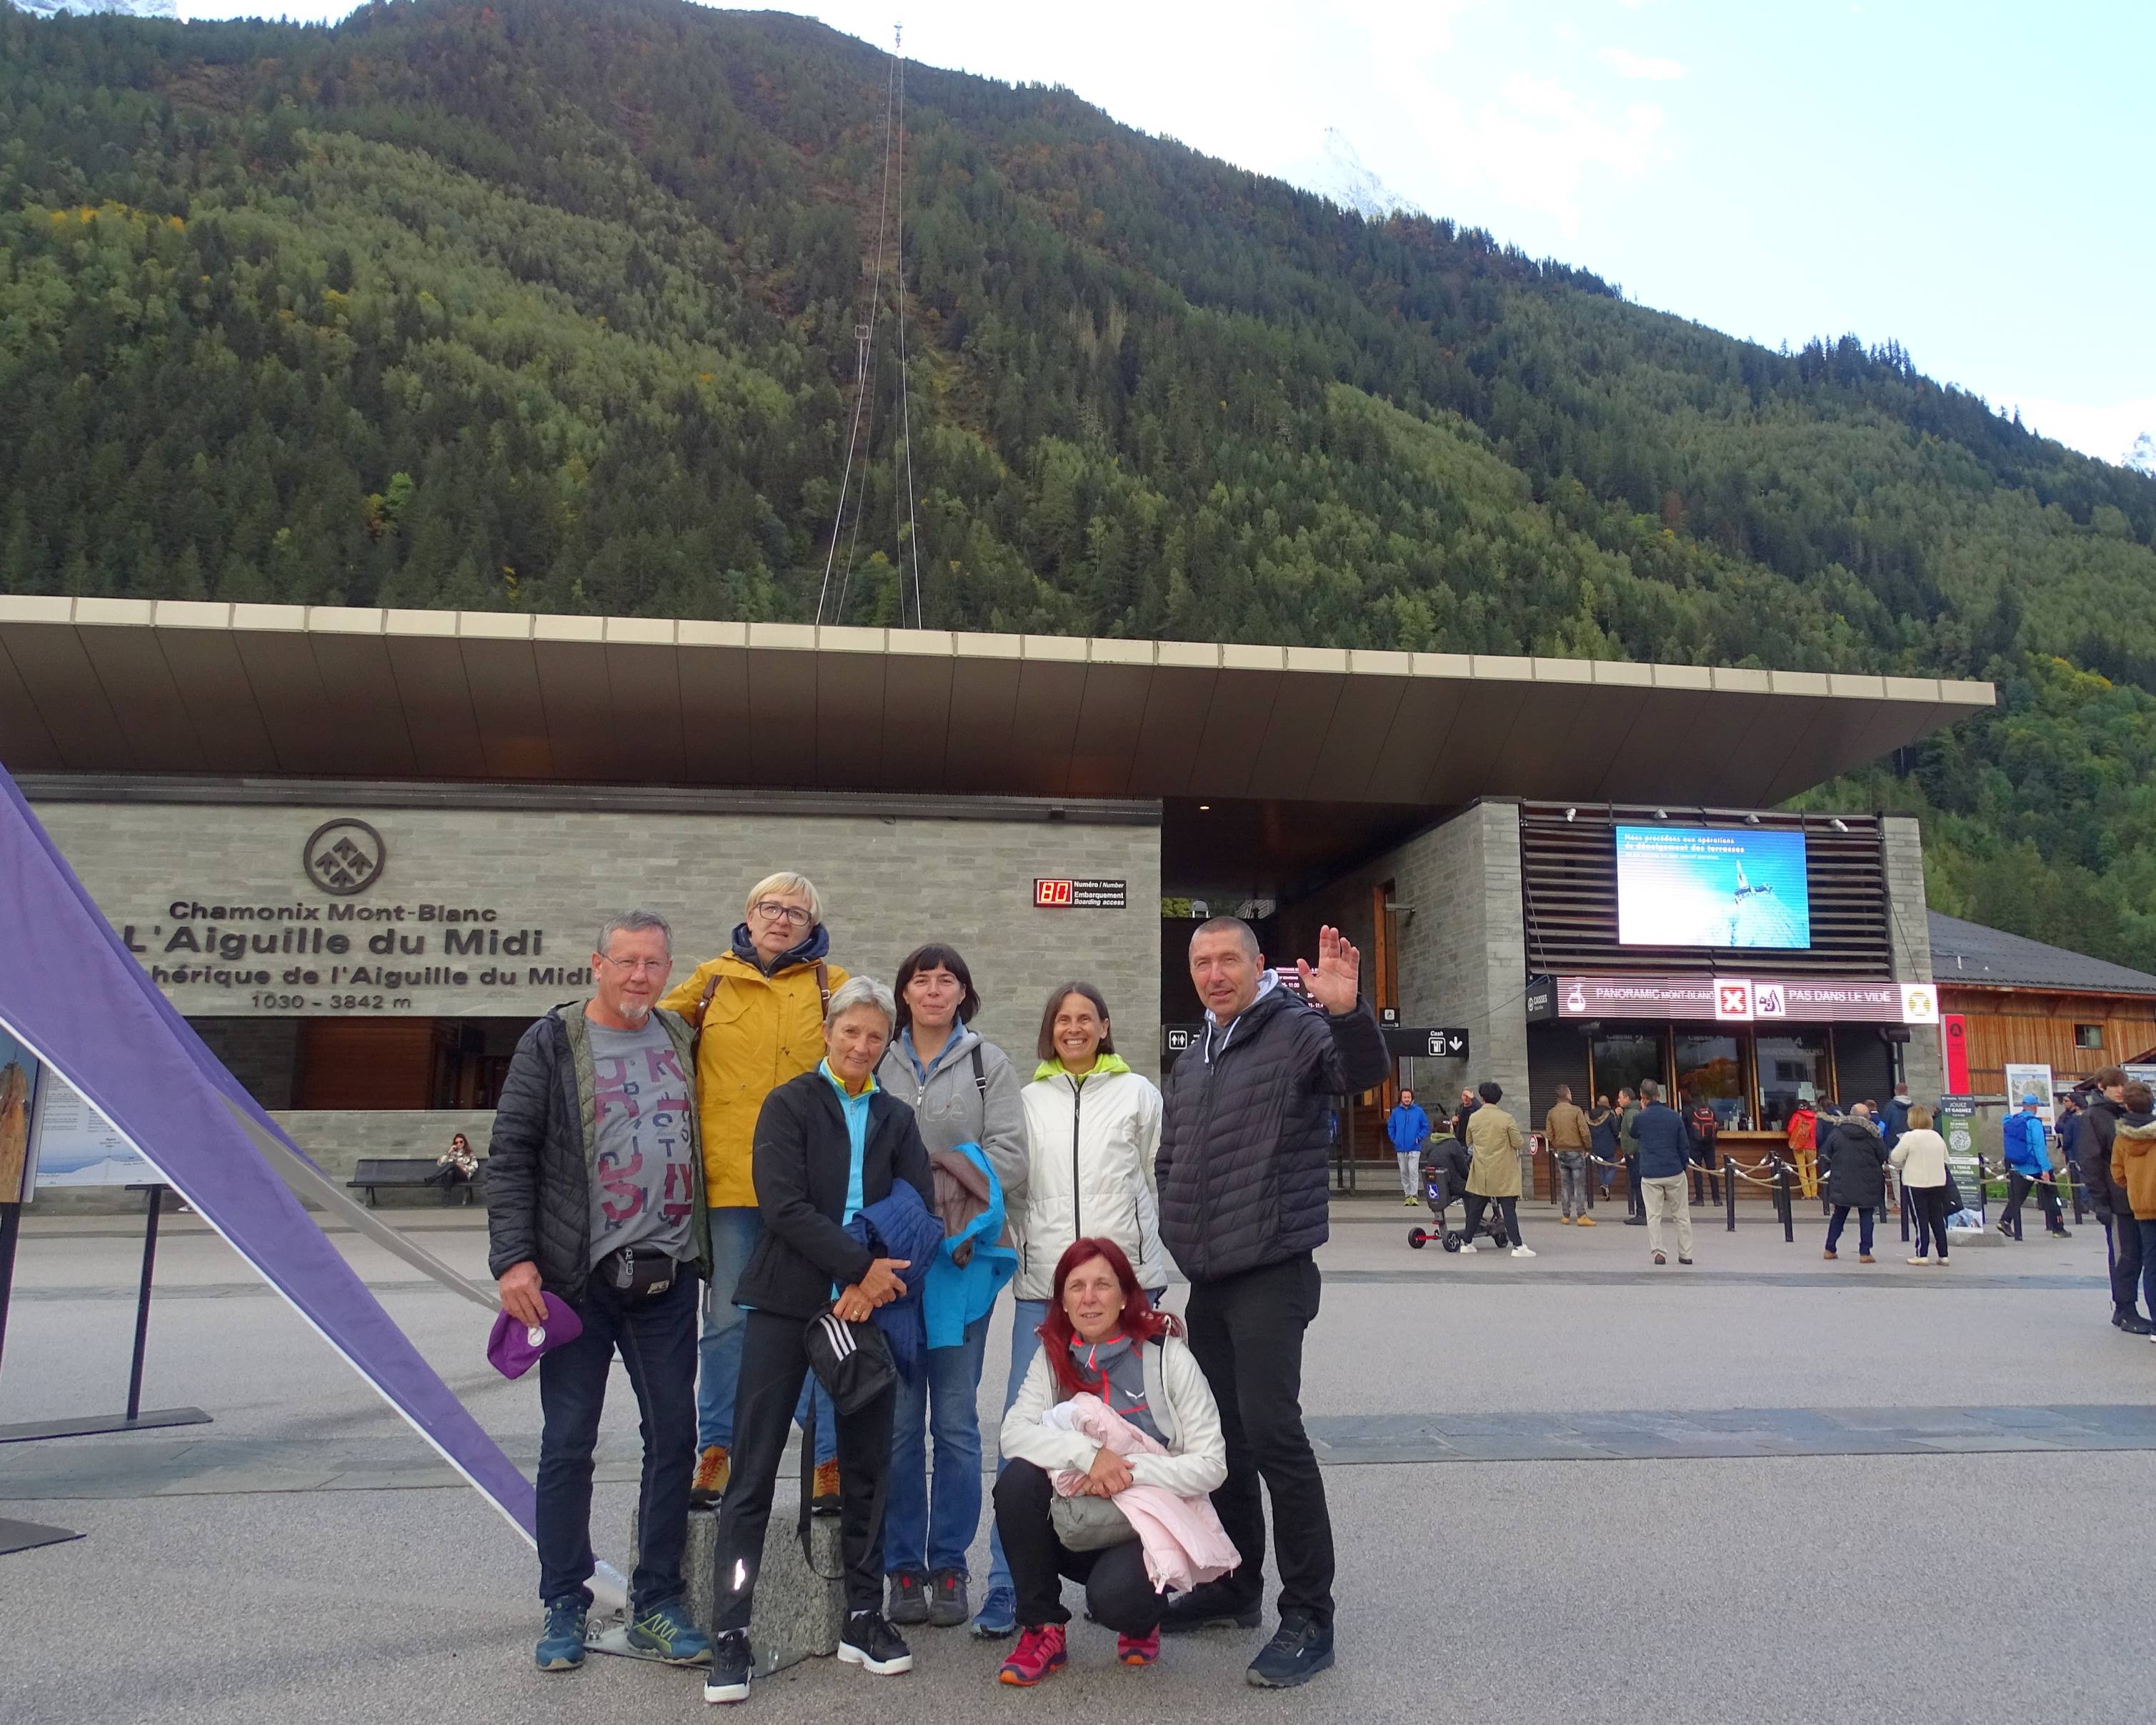 Group of people living with aphasia from Slovenia standing in front of the gondola at Chamonix, France.